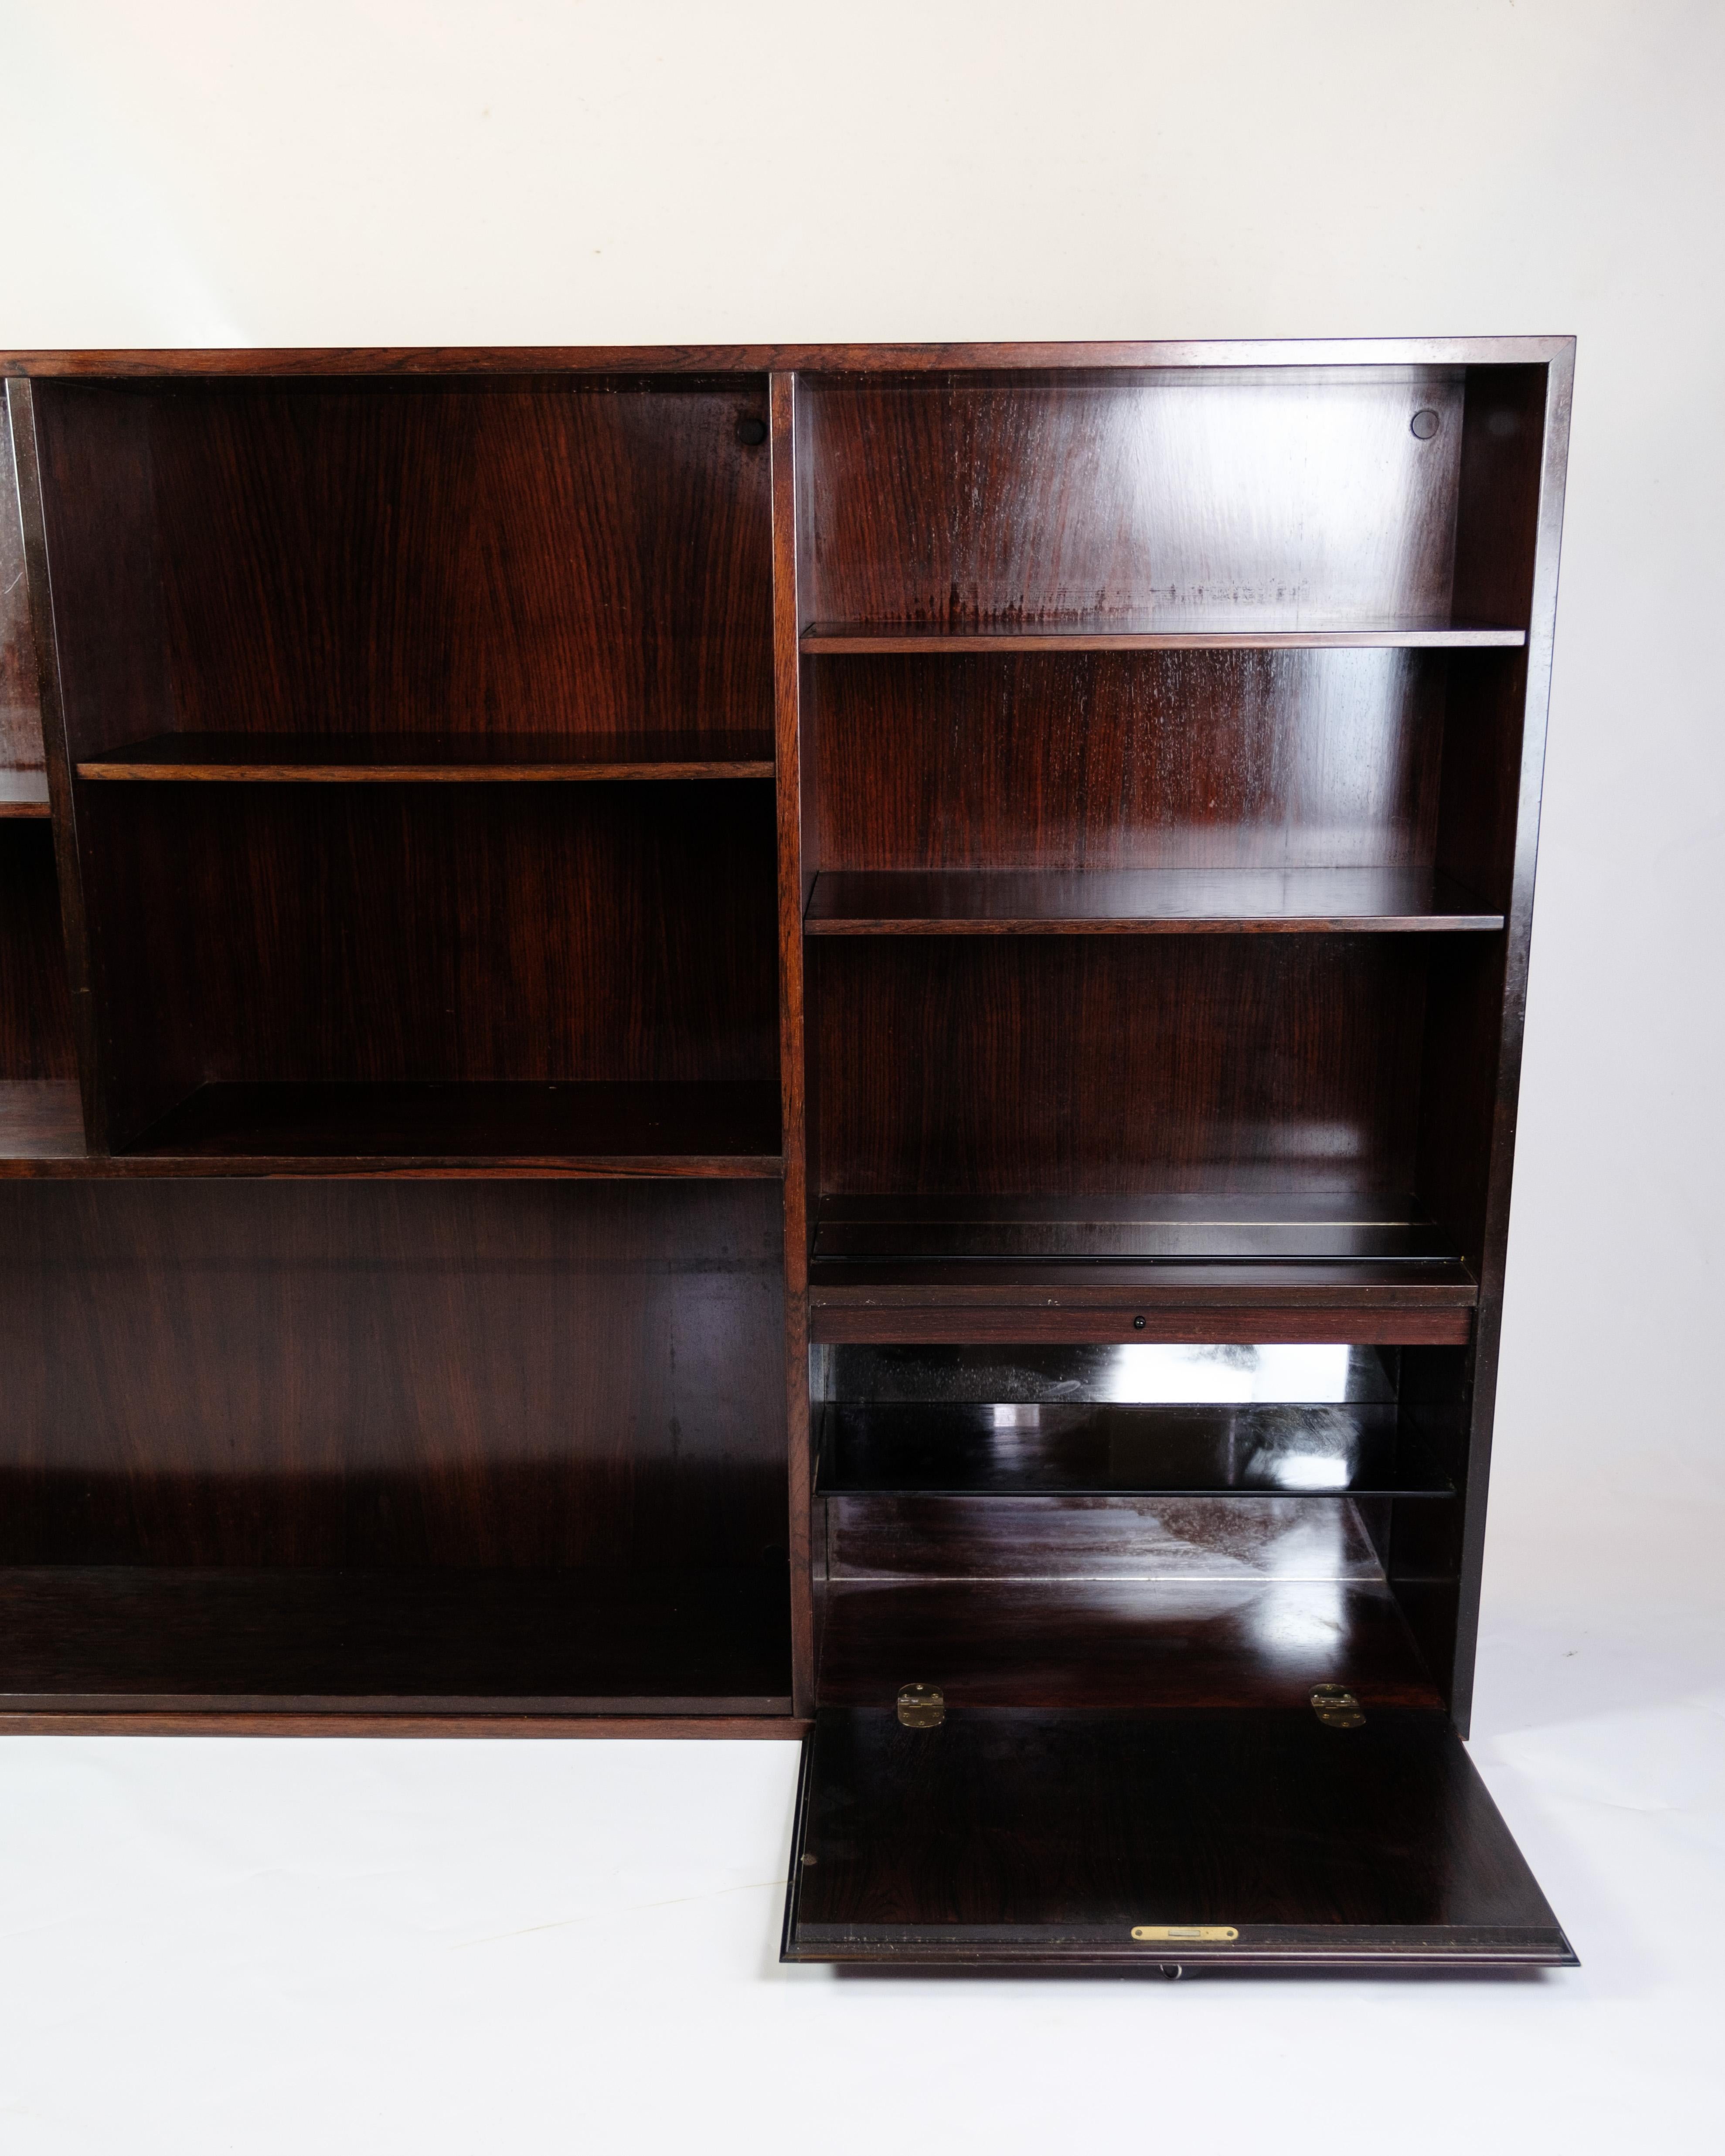 Danish Bookcase Model 35 Made In Rosewood By Omann Jun. Furniture Factory From 1960s For Sale